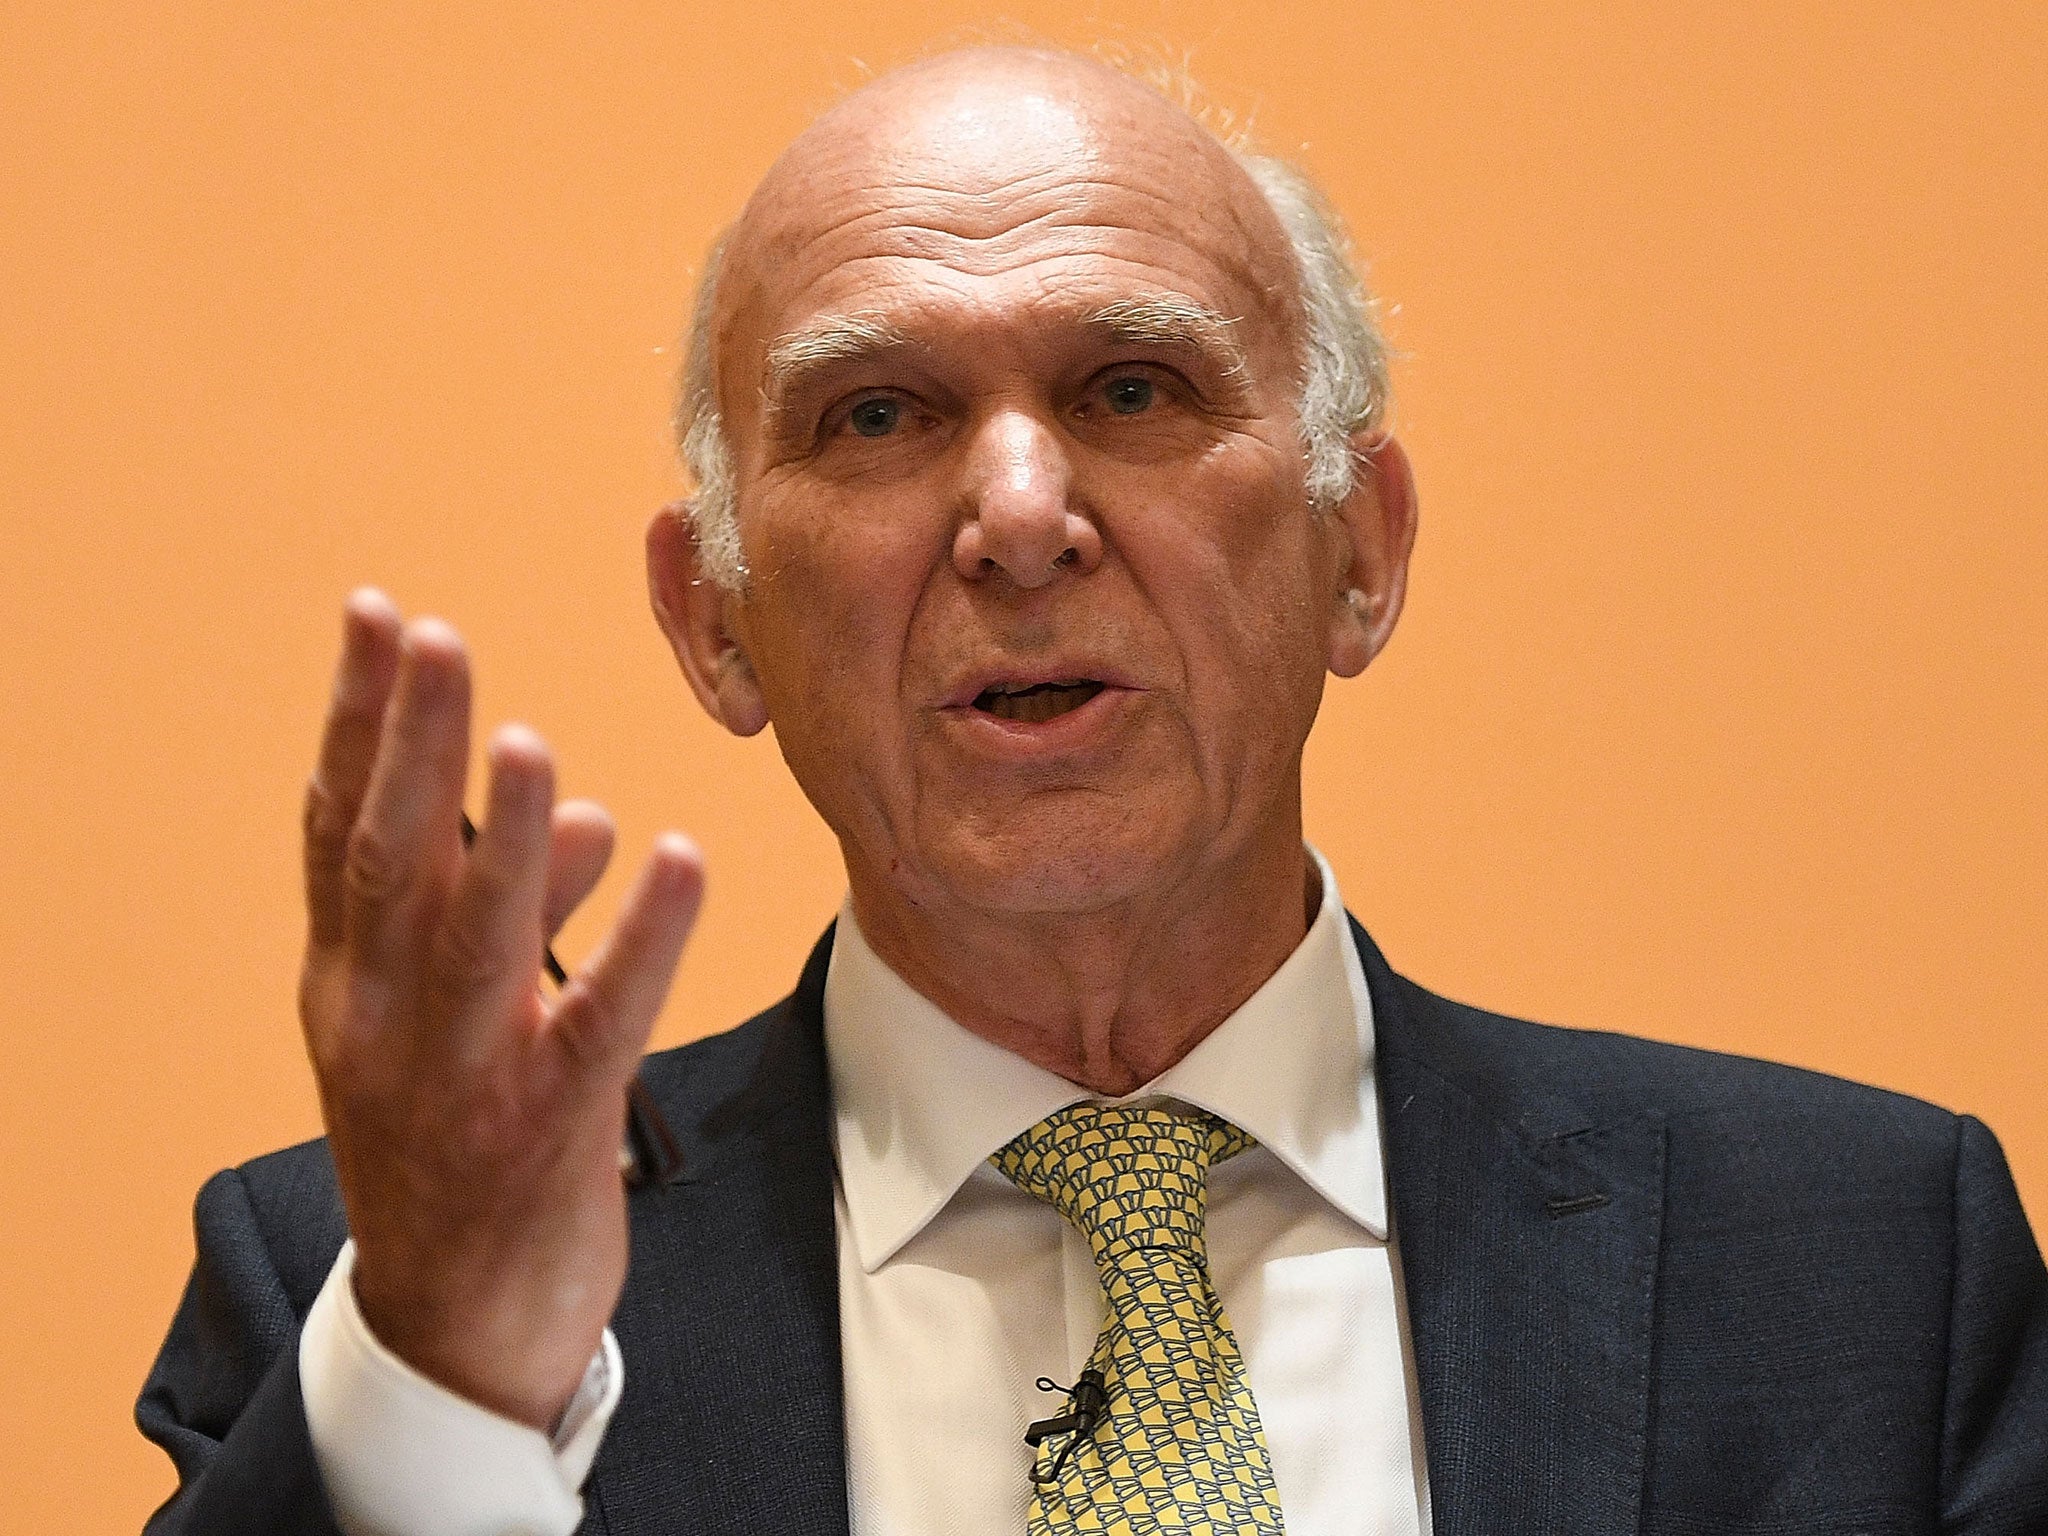 With barely a dozen MPs and a poll rating that remains stubbornly in single figures, and only one truly national figure still in the Commons, leader Sir Vince Cable, this guerrilla force struggles to make an impact